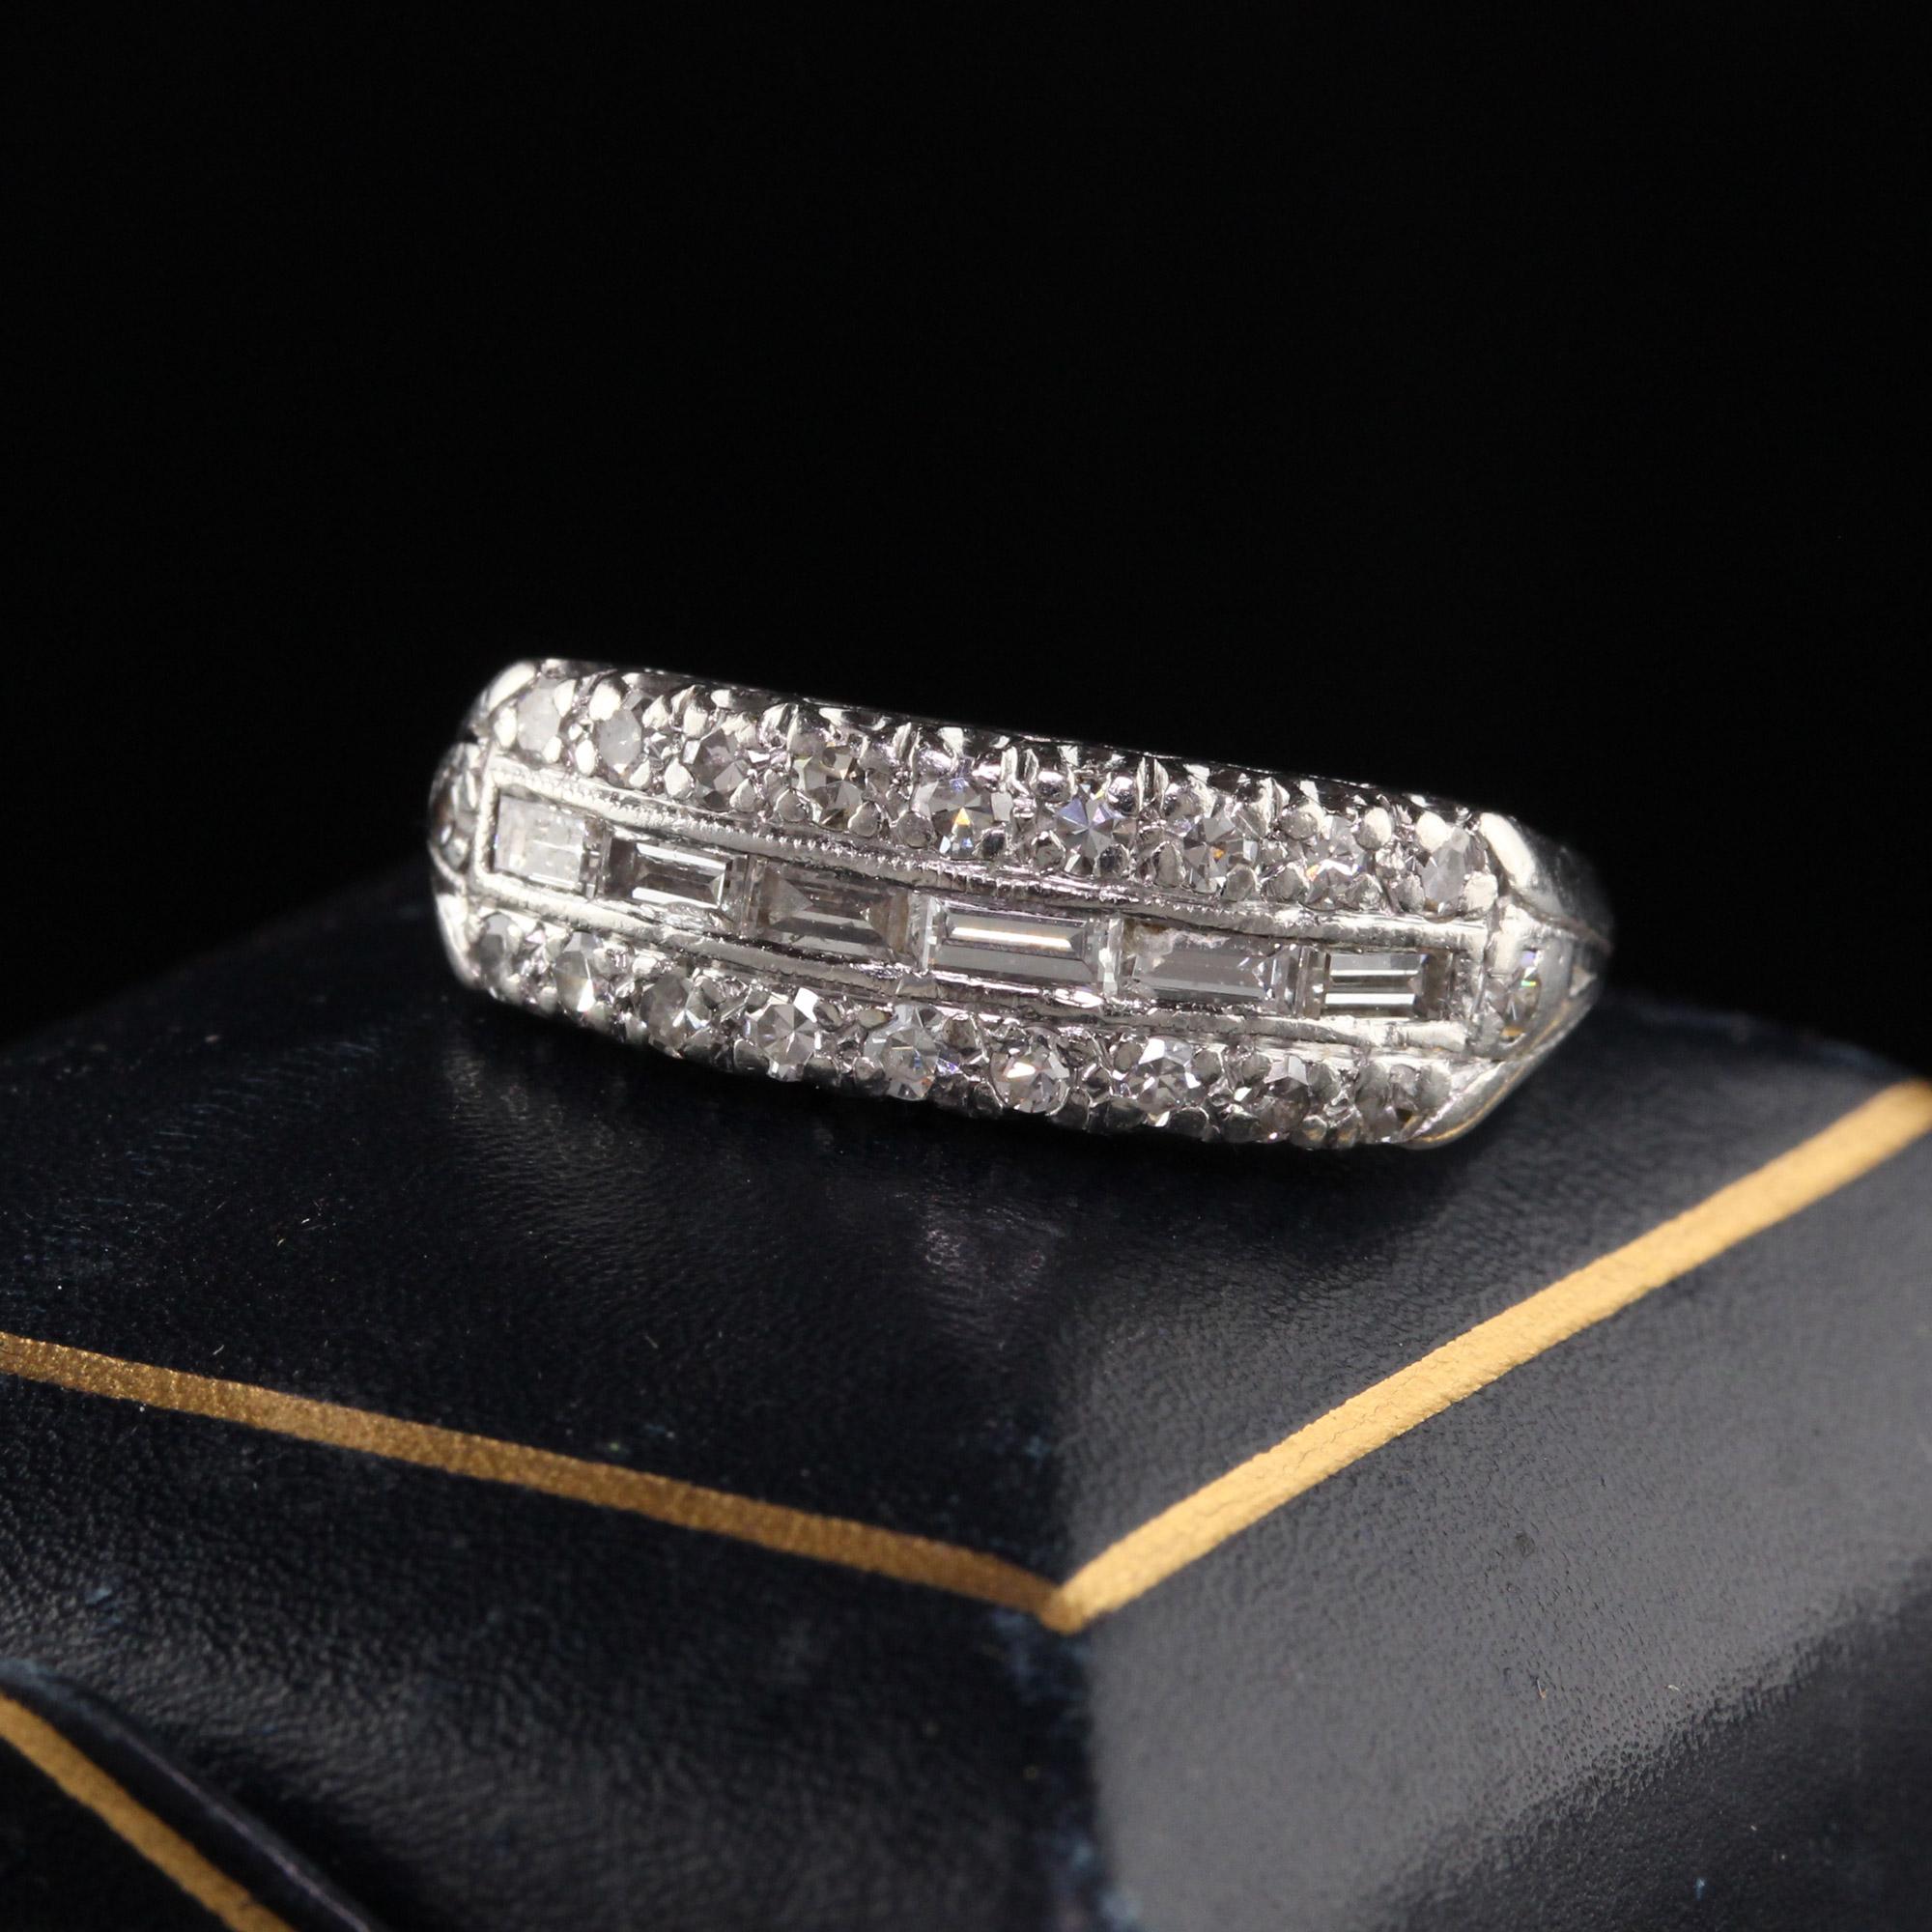 Beautiful Antique Art Deco Platinum Baguette and Single Cut Diamond Wedding Band. This beautiful wedding band is crafted in platinum and has a row of baguette diamonds in the center of two rows of single cut diamonds. One of the baguette diamonds is